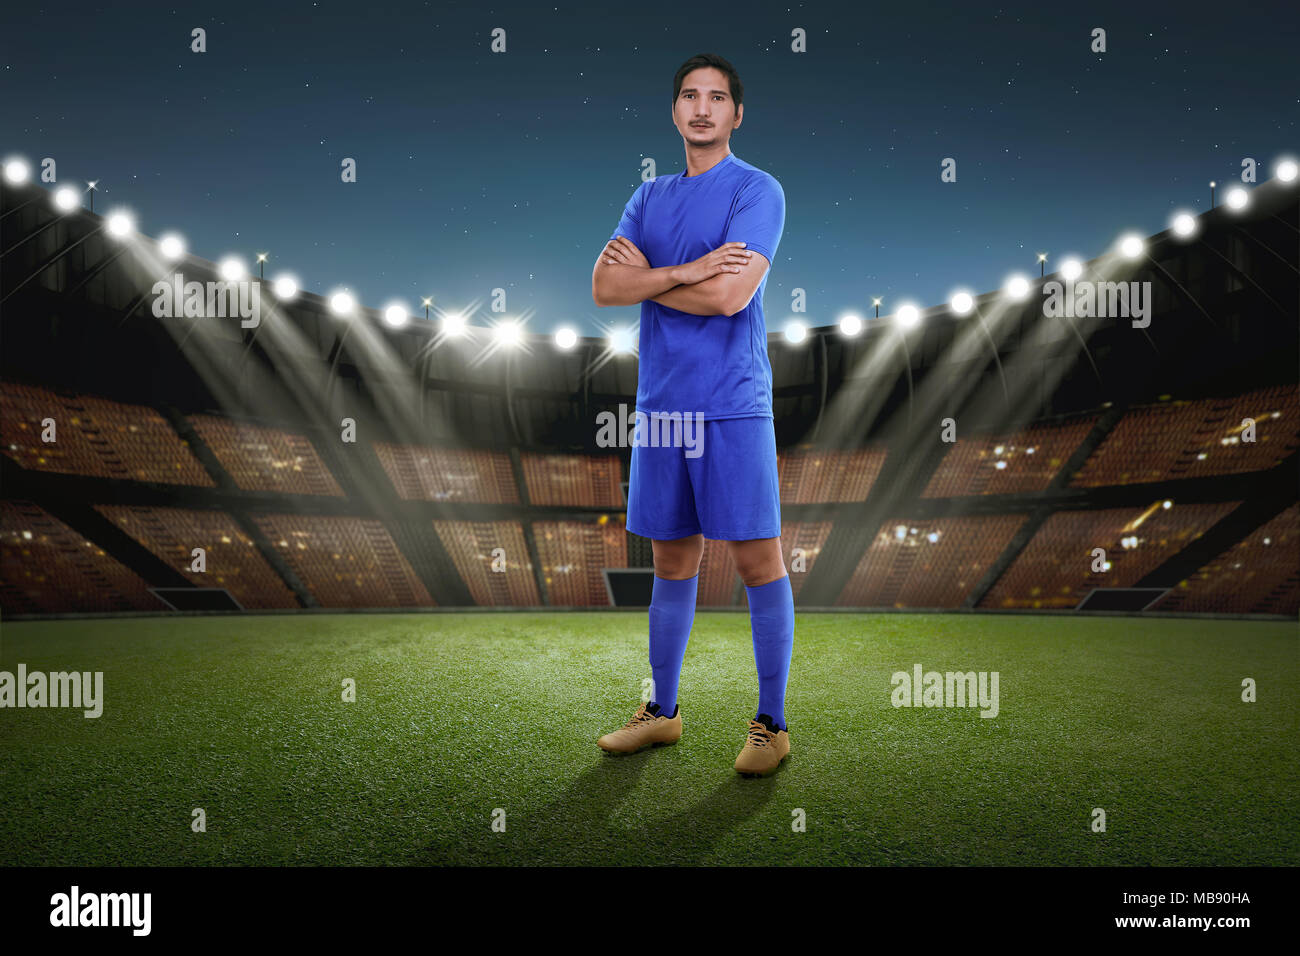 Handsome asian soccer player with blue jersey standing on the stadium field  Stock Photo - Alamy